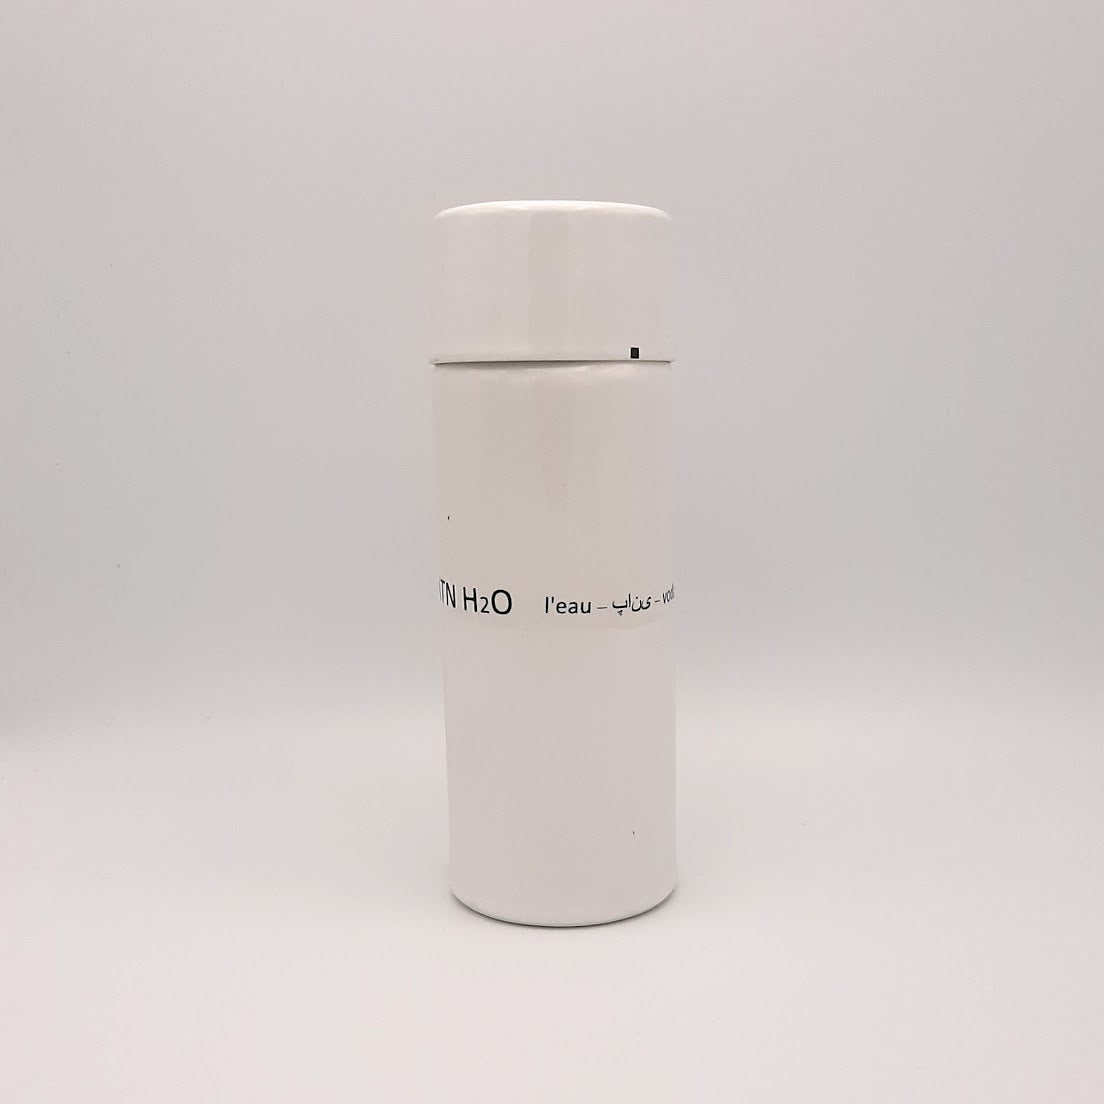 Kaolin - Guðný Magnúsdóttir - H2o WATER KARAFE - are designed in remembrance of the importance of water for all living creatures, the text says water in different languages. ICE - a water bottle in two white glazes. The water bottle comes with a cap.